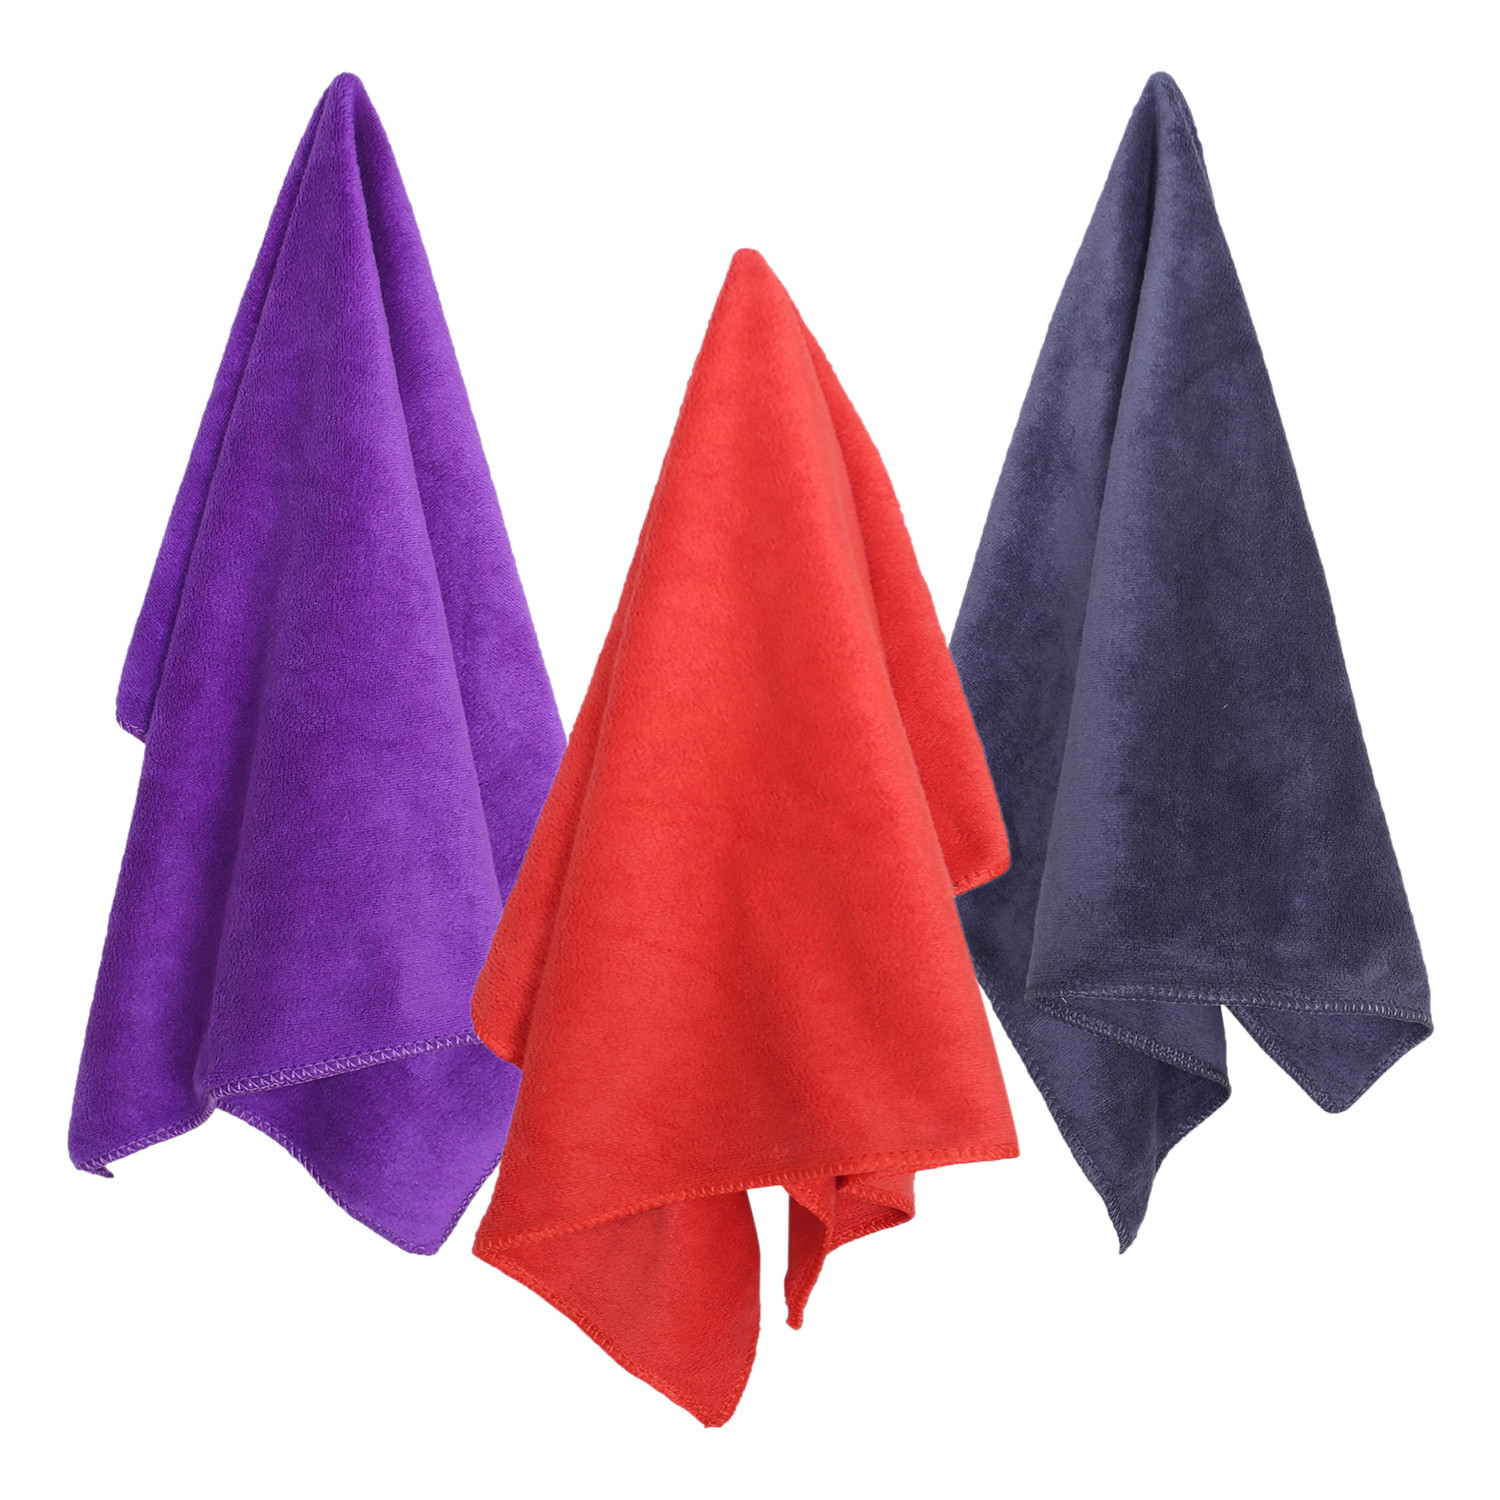 Kuber Industries Cleaning Cloths|Microfiber Highly Absorbent Wash Towels for Kitchen,Car,Window,24 x 16 Inch,Pack of 3 (Red,Gray & Purple)